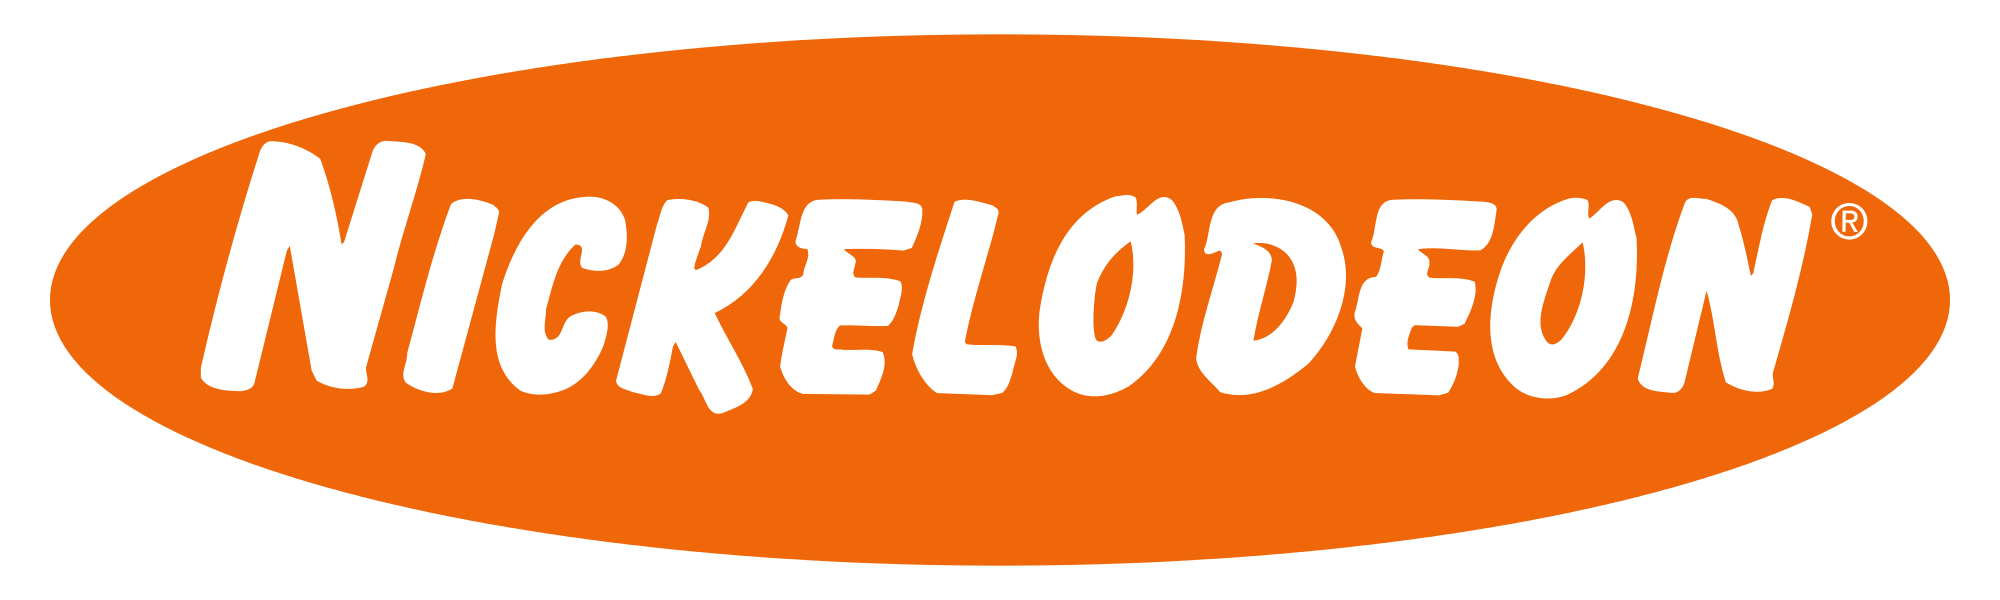 Nickelodoen Logo - Meaning Nickelodeon logo and symbol | history and evolution